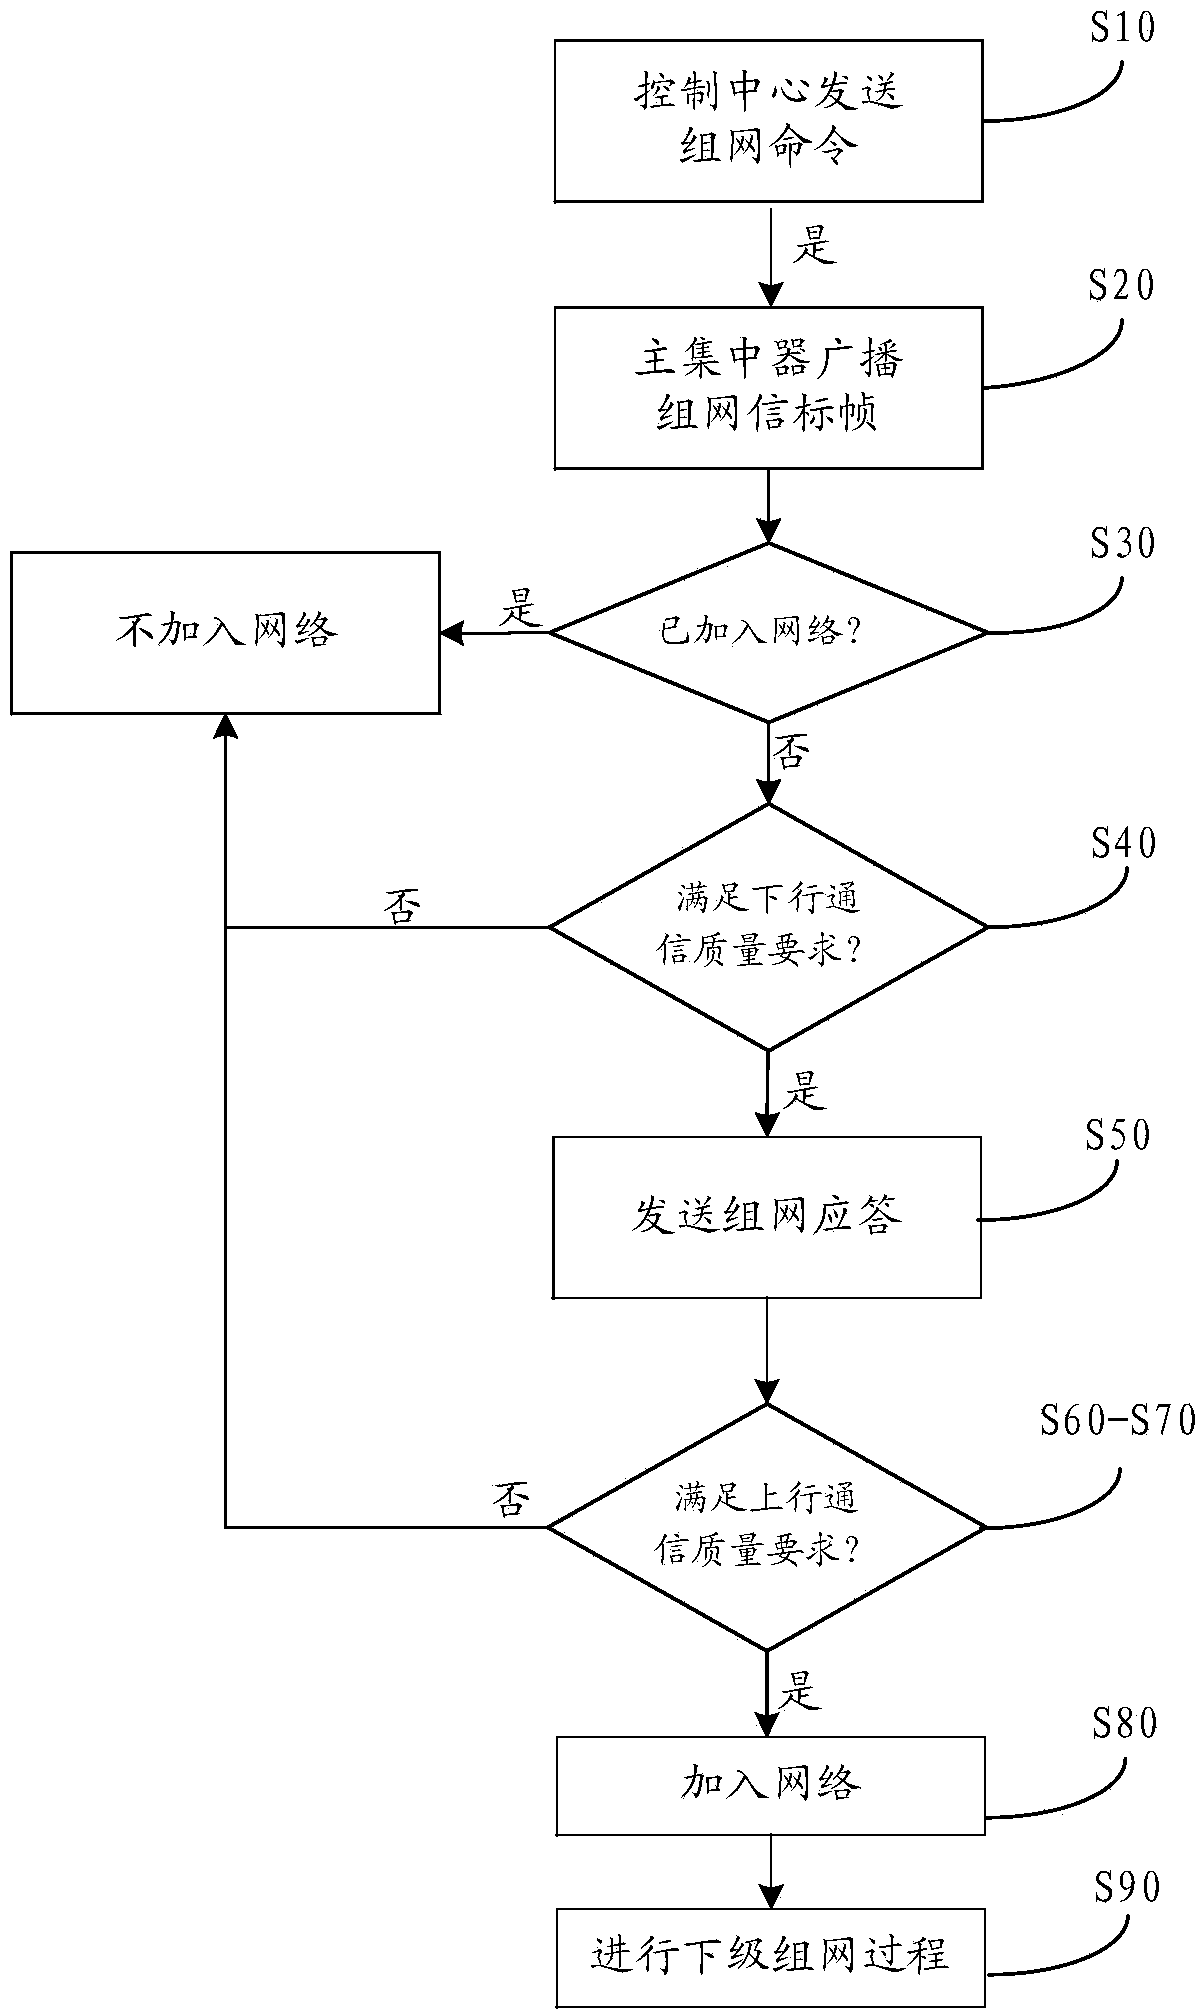 Power line carrier-based intelligent networking control system and method